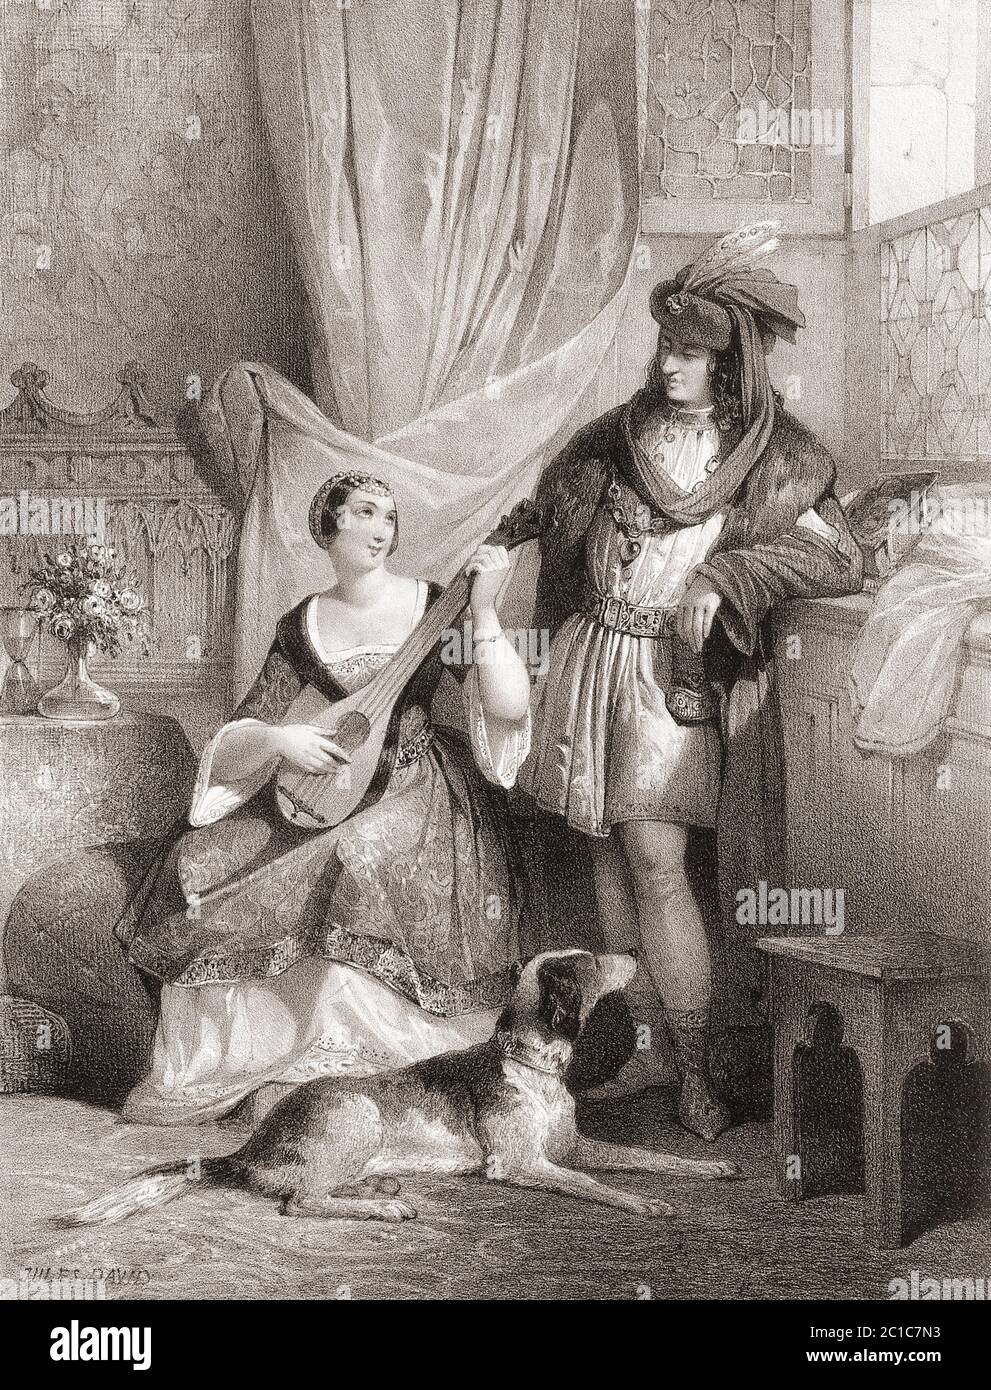 King Charles VII of France with his chief mistress Agnes Sorel.   After a 19th century work by Jules David. Stock Photo